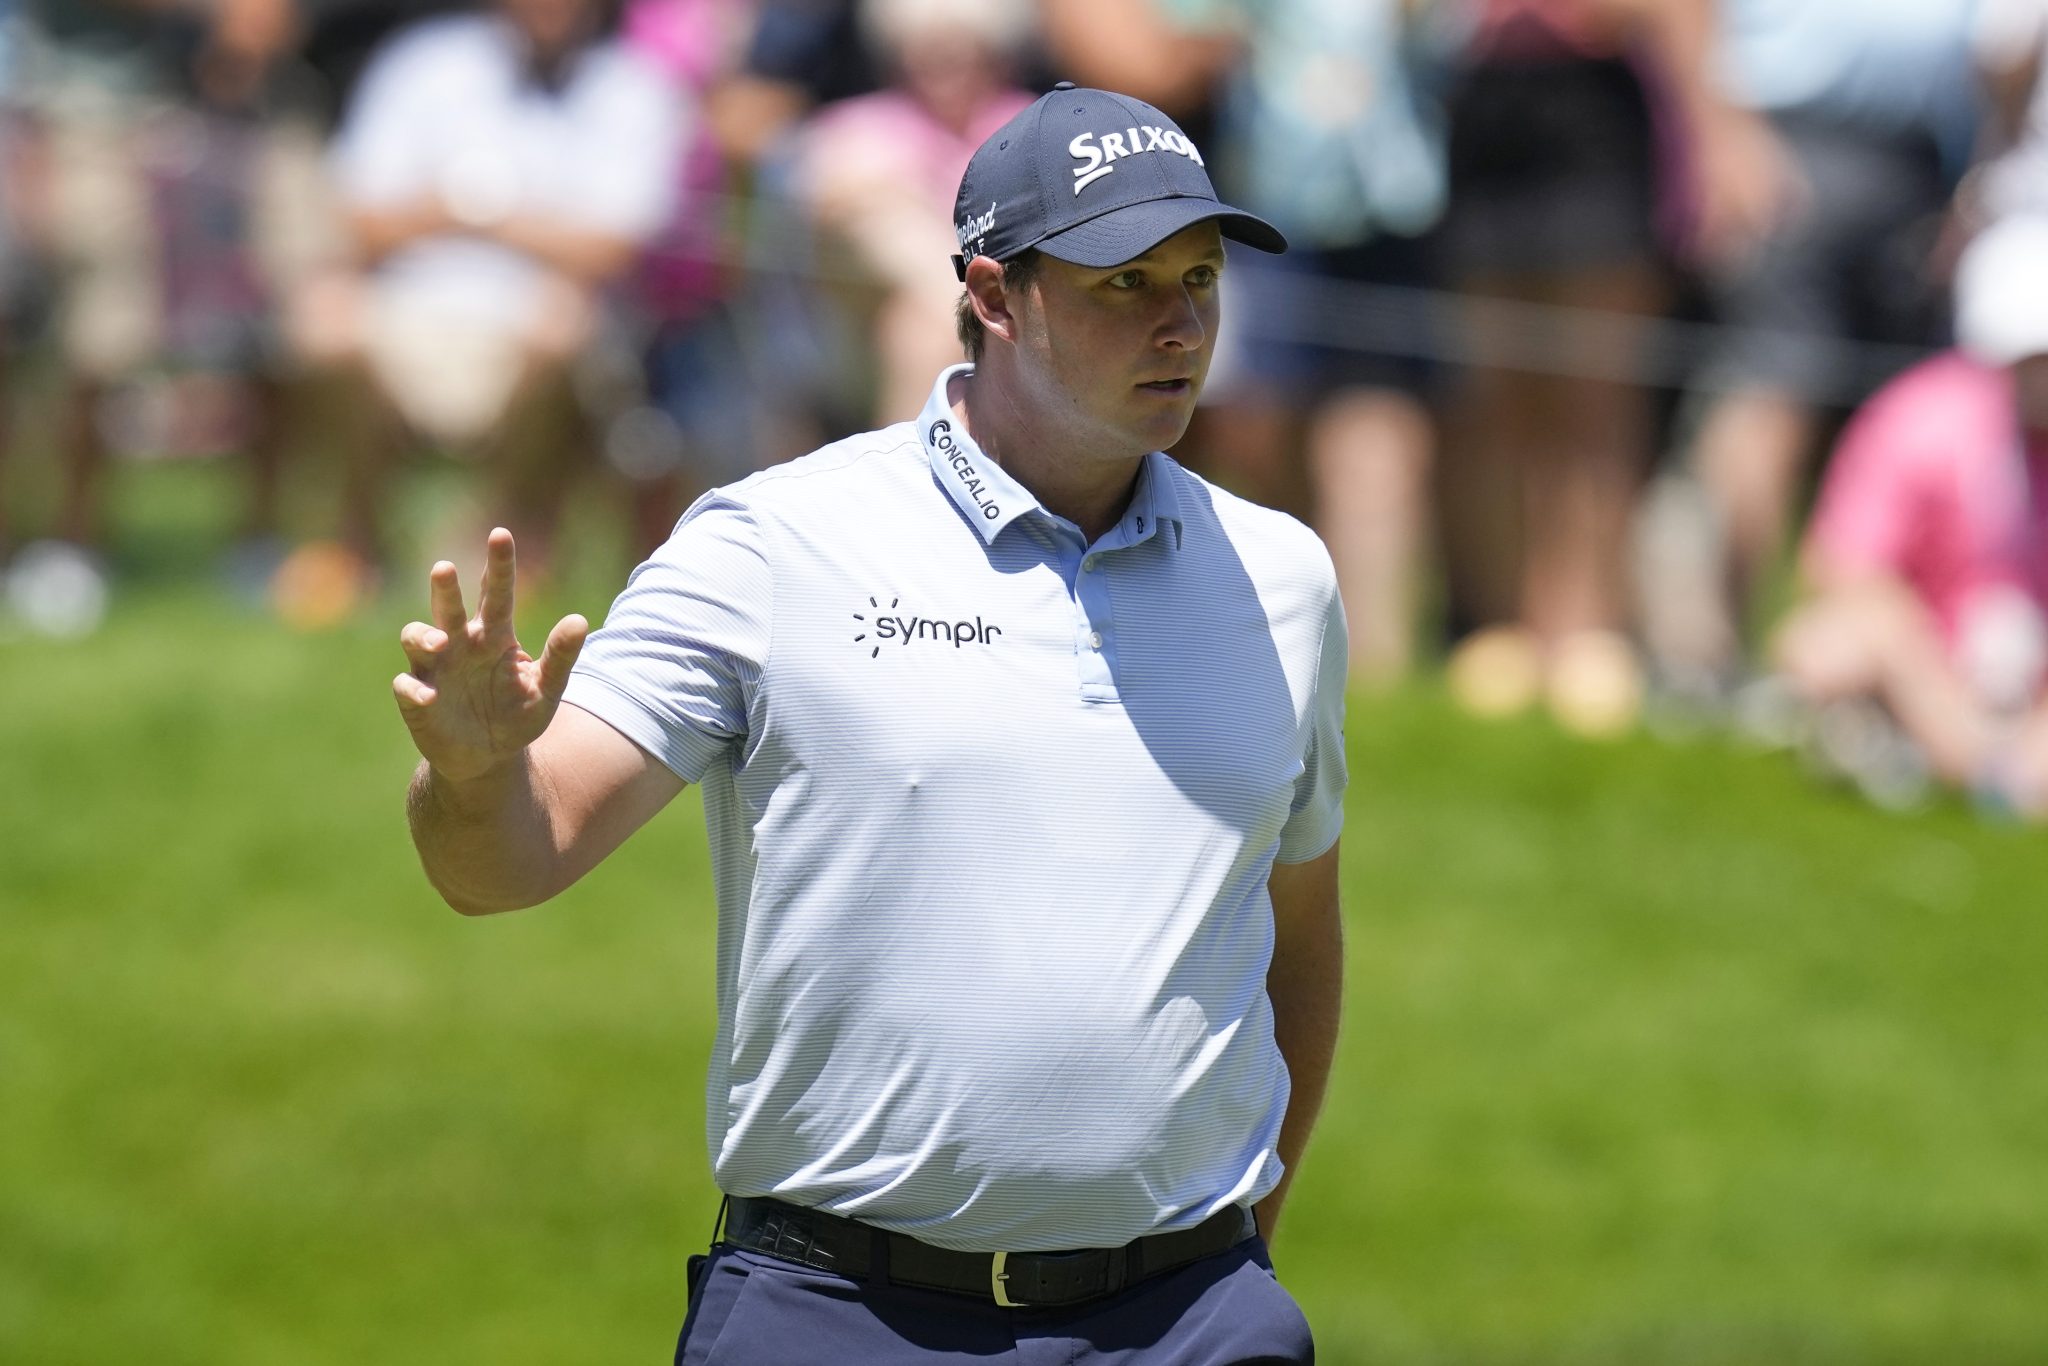 Sepp Straka boosts Ryder Cup chances with John Deere Classic victory